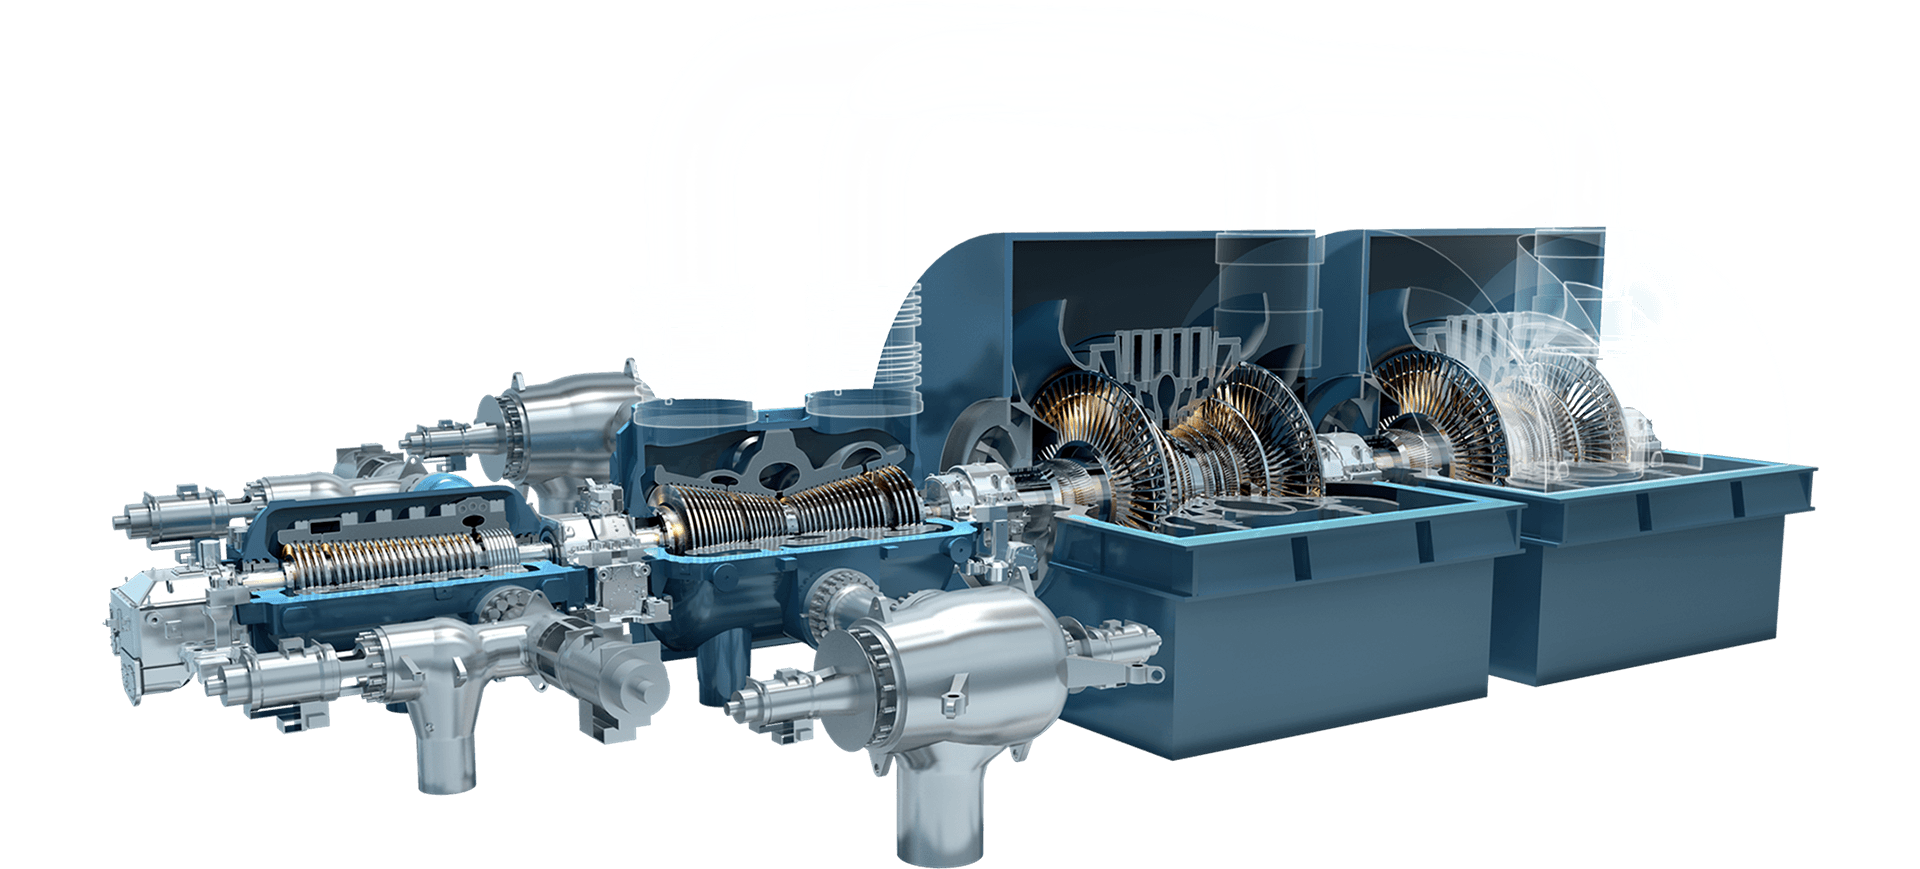 Product GE STF-D850 & STF-A850 Reheat Steam Turbines | GE Steam Power image